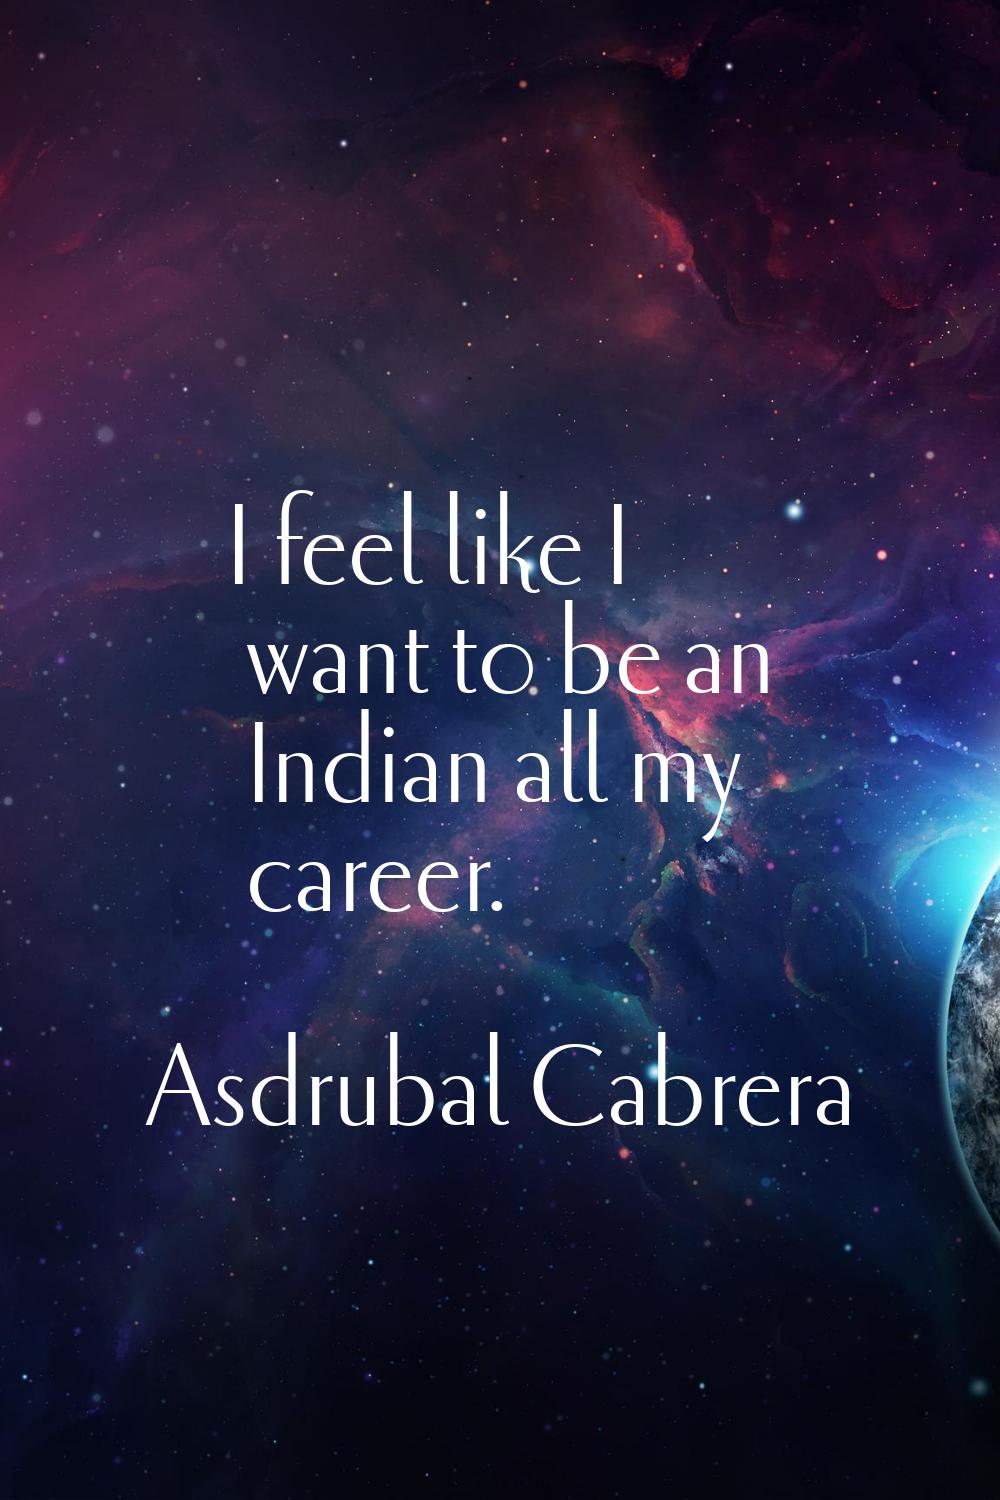 I feel like I want to be an Indian all my career.